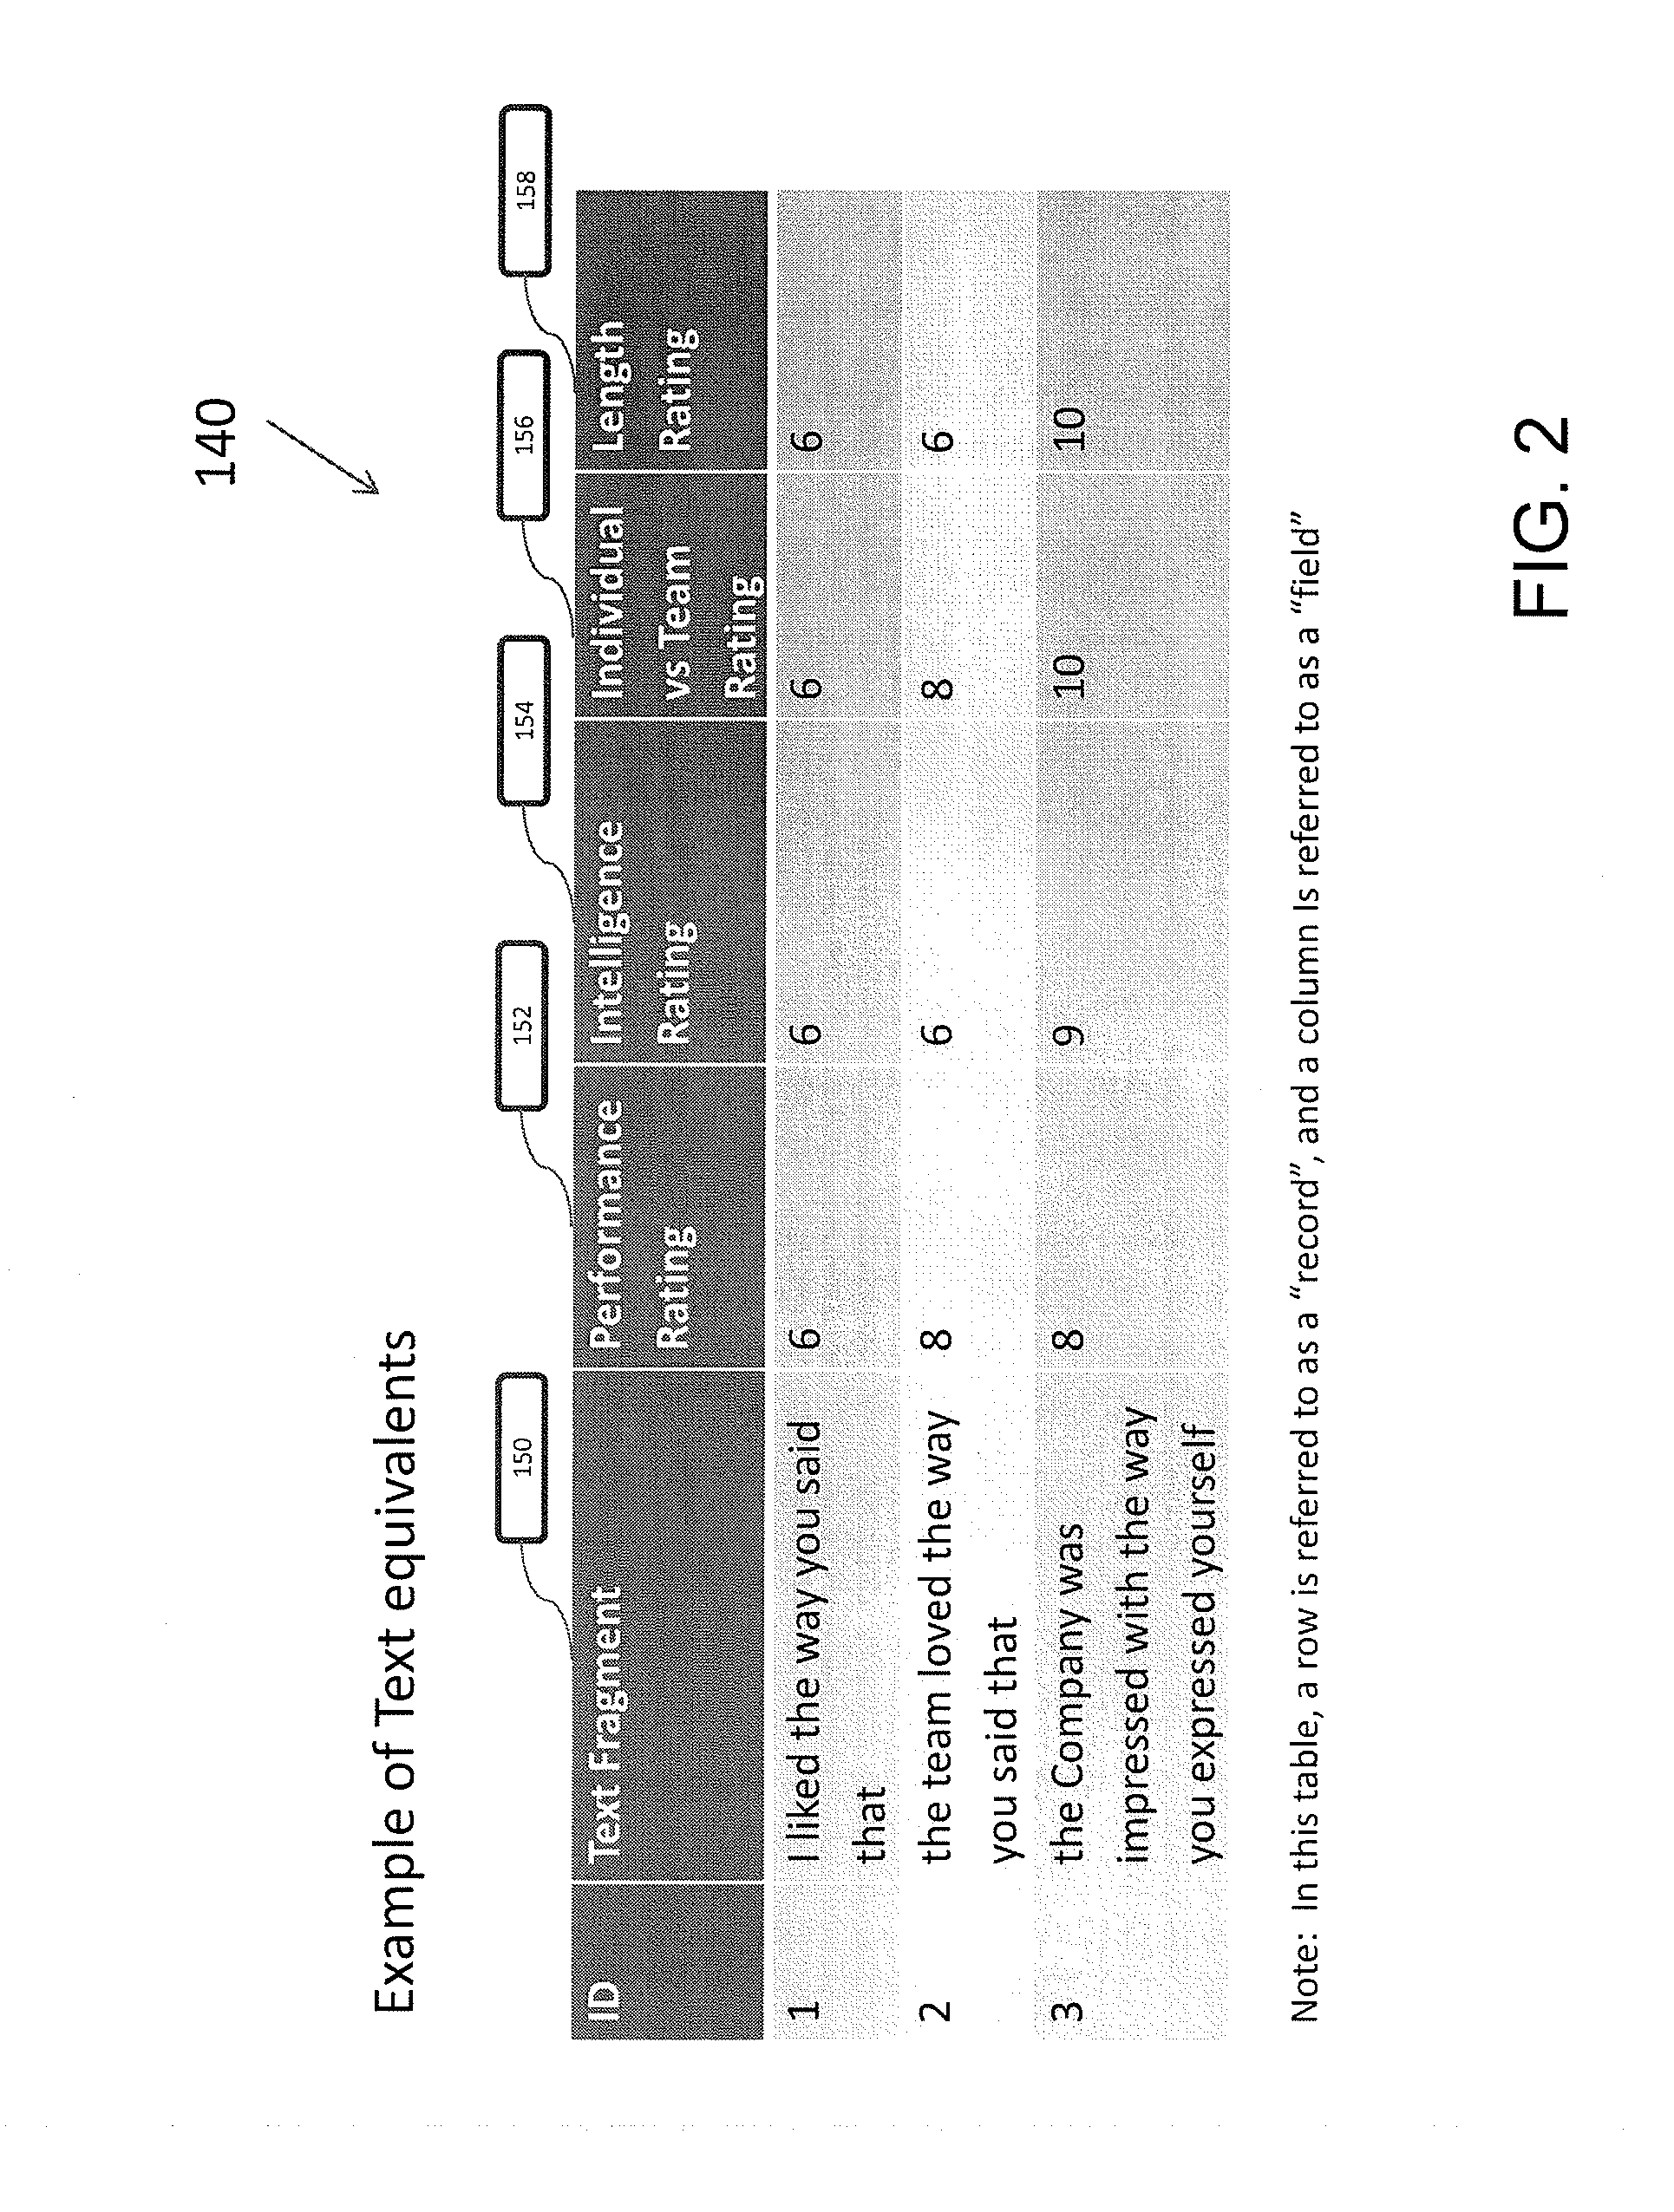 Methods and systems for compiling communication fragments and creating effective communication